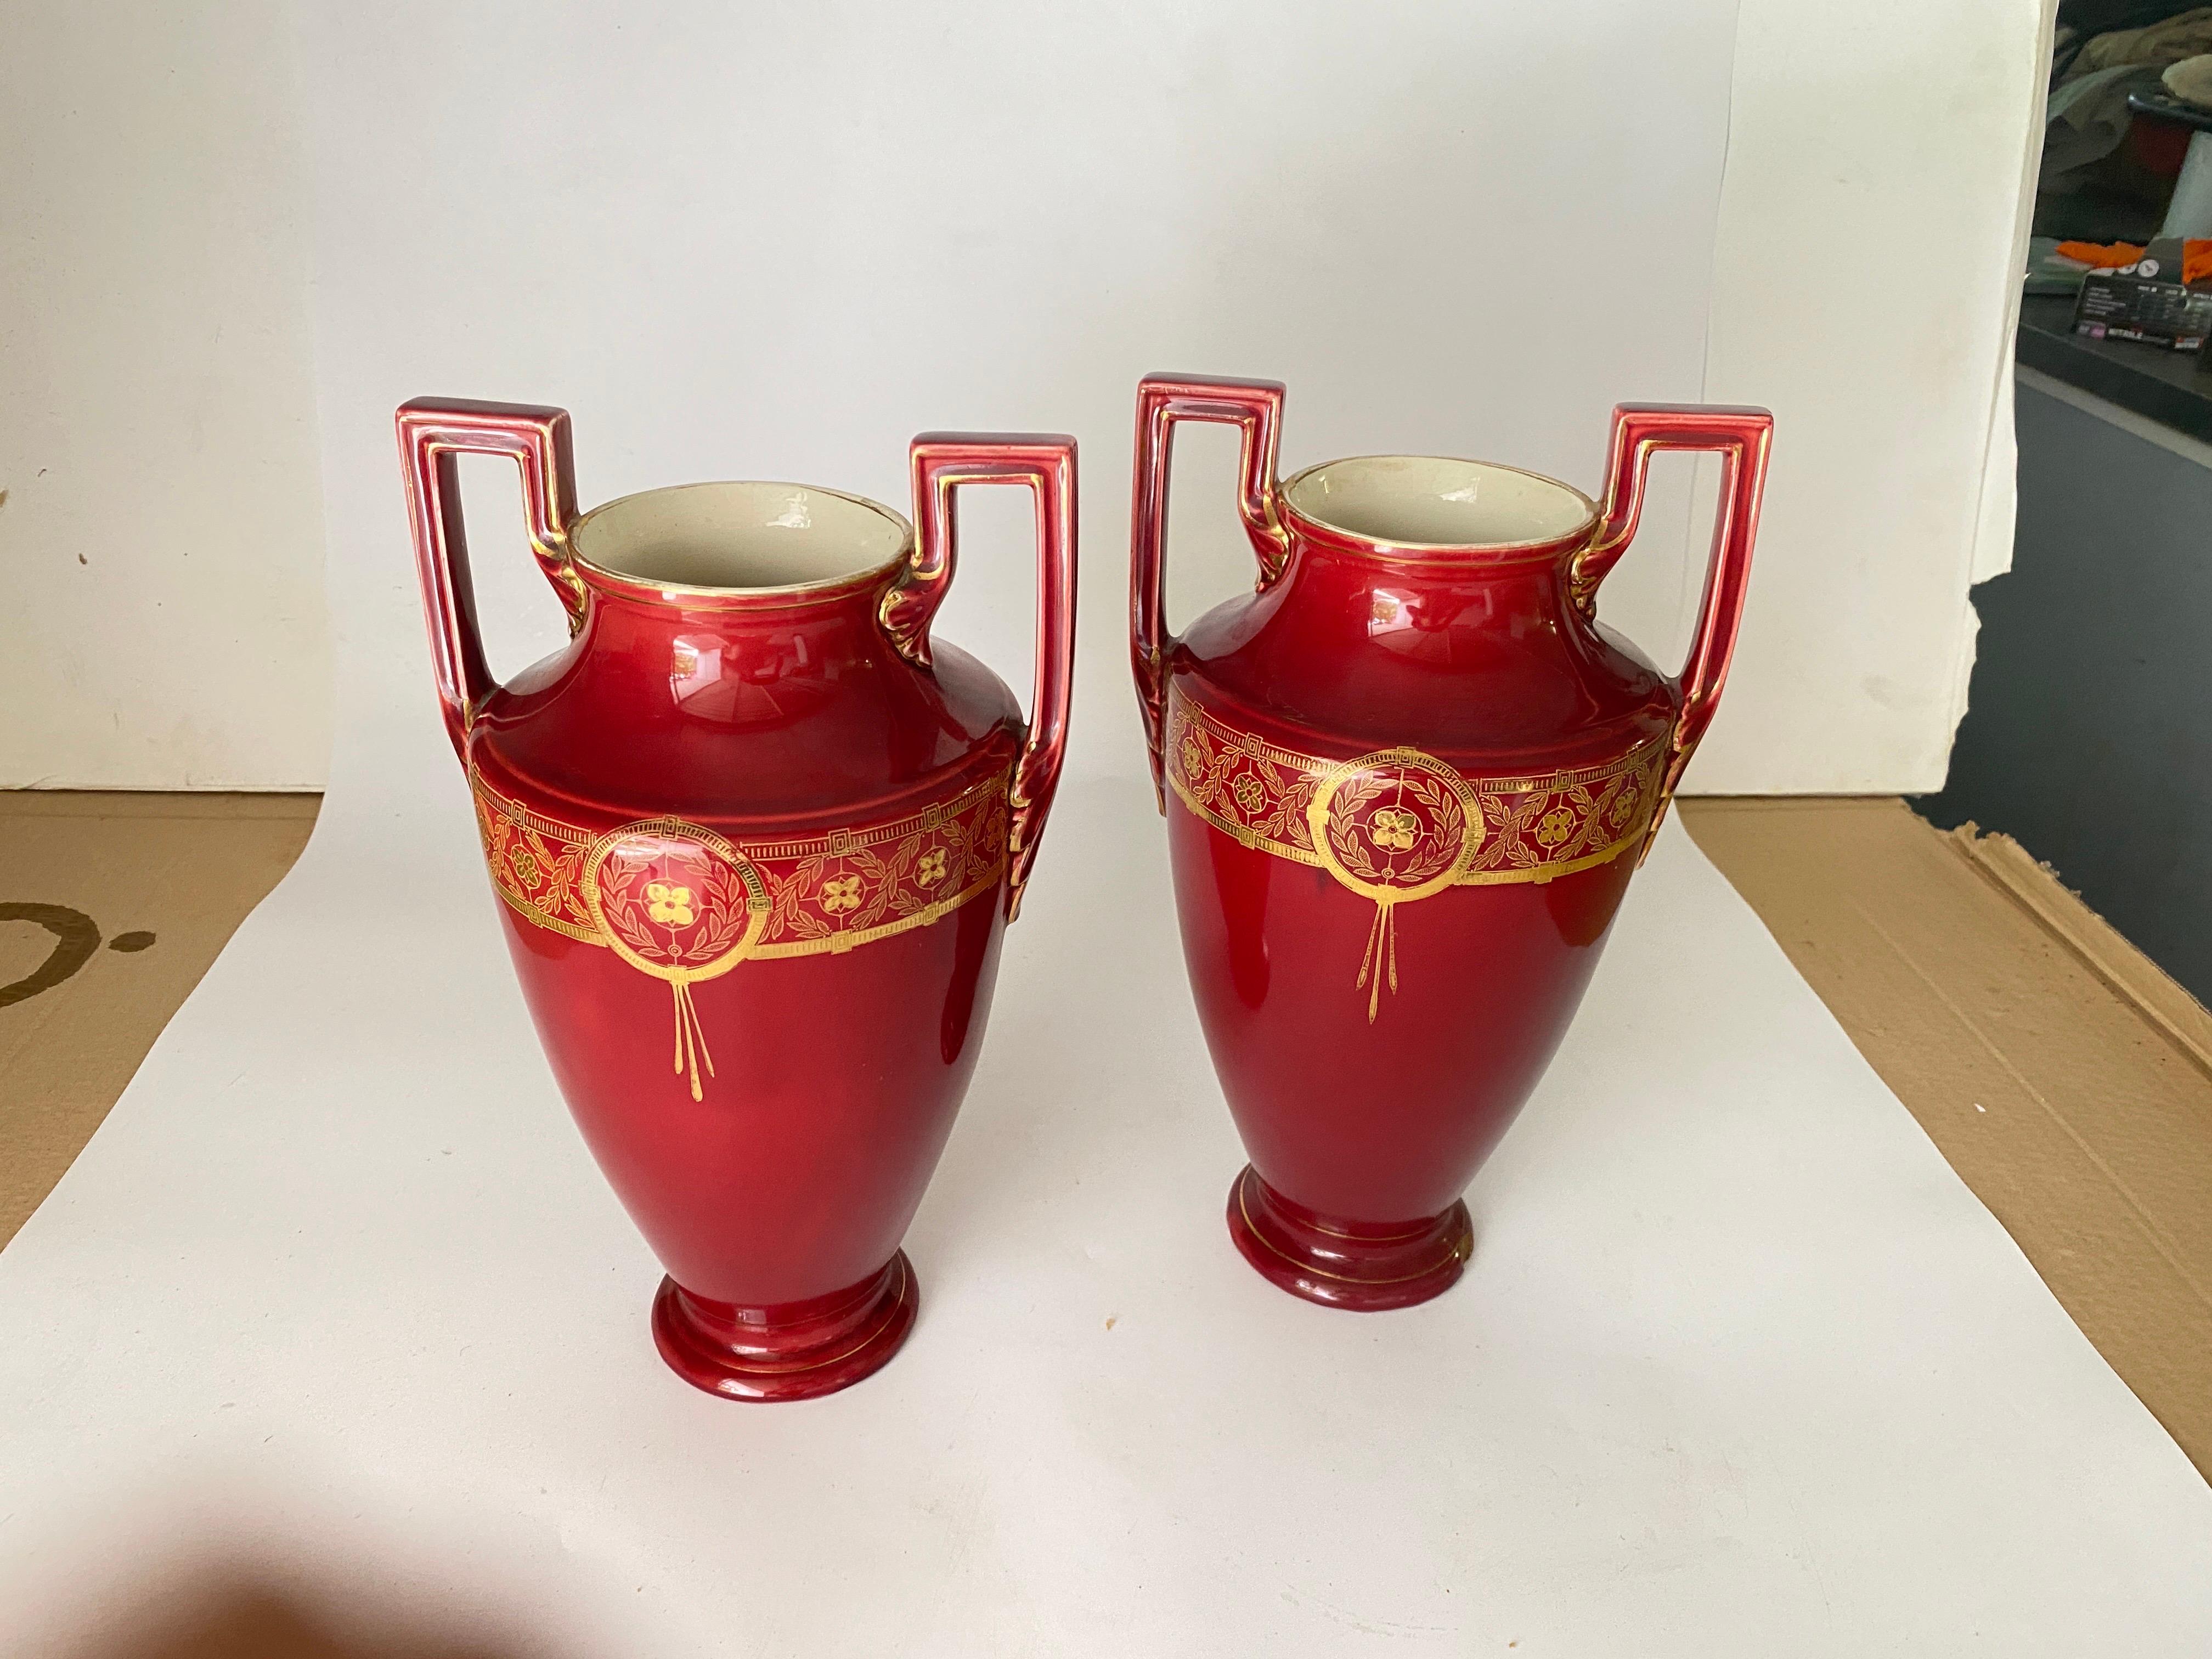 Pair of red cobalt urns Vase with ceramic handles and Gilted decorations For Sale 4